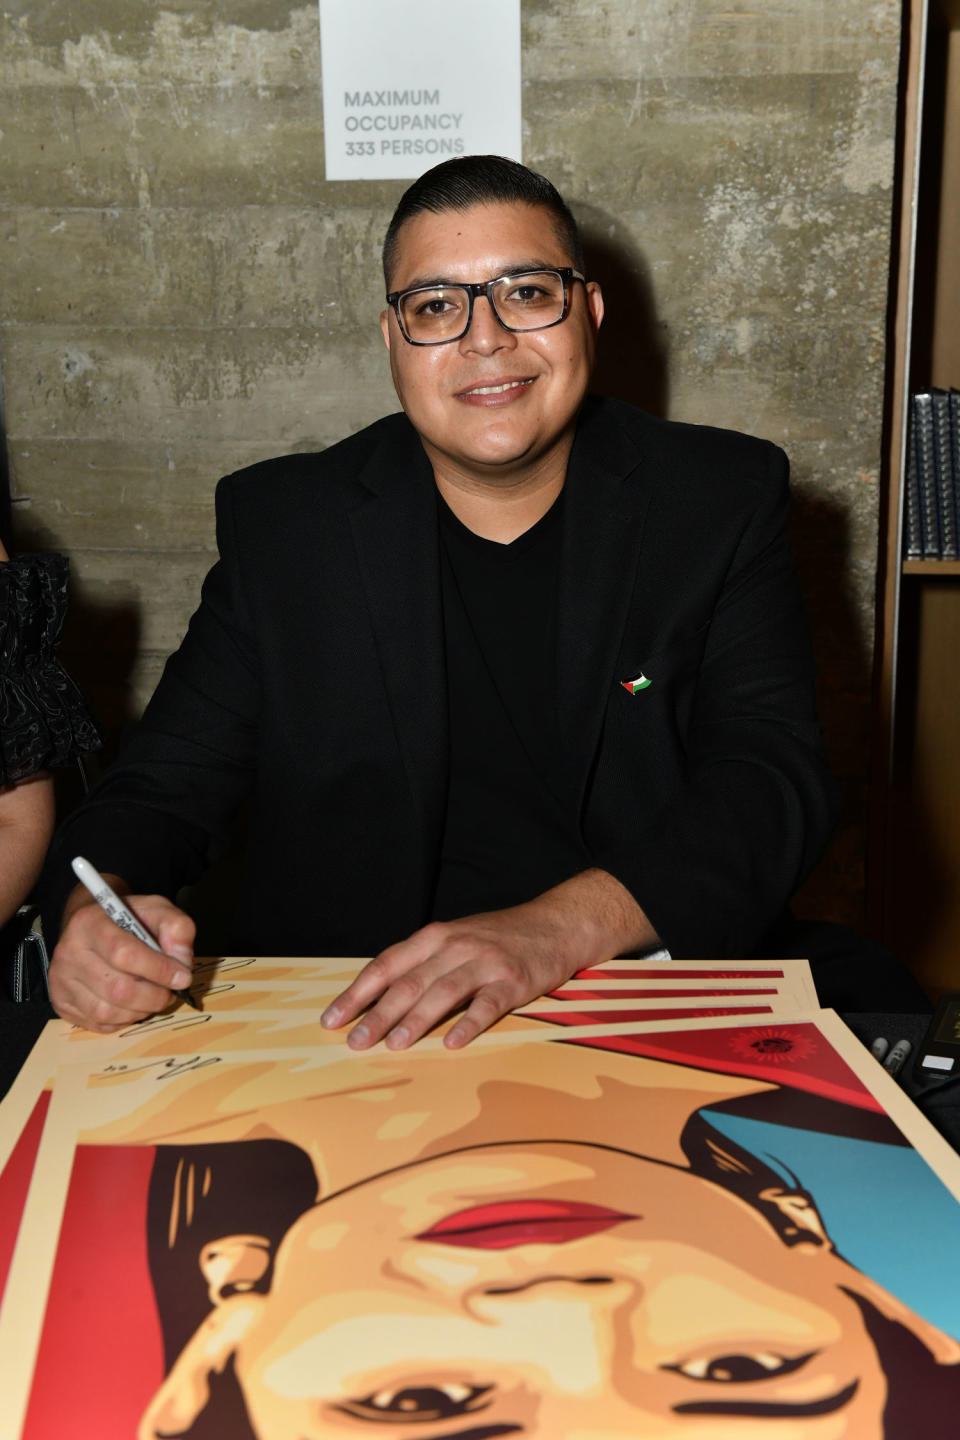 Artist Ernesto Yerena with his painting of America Ferrera for the event. (Craig Barritt / Getty Images for The Latinx Hous)